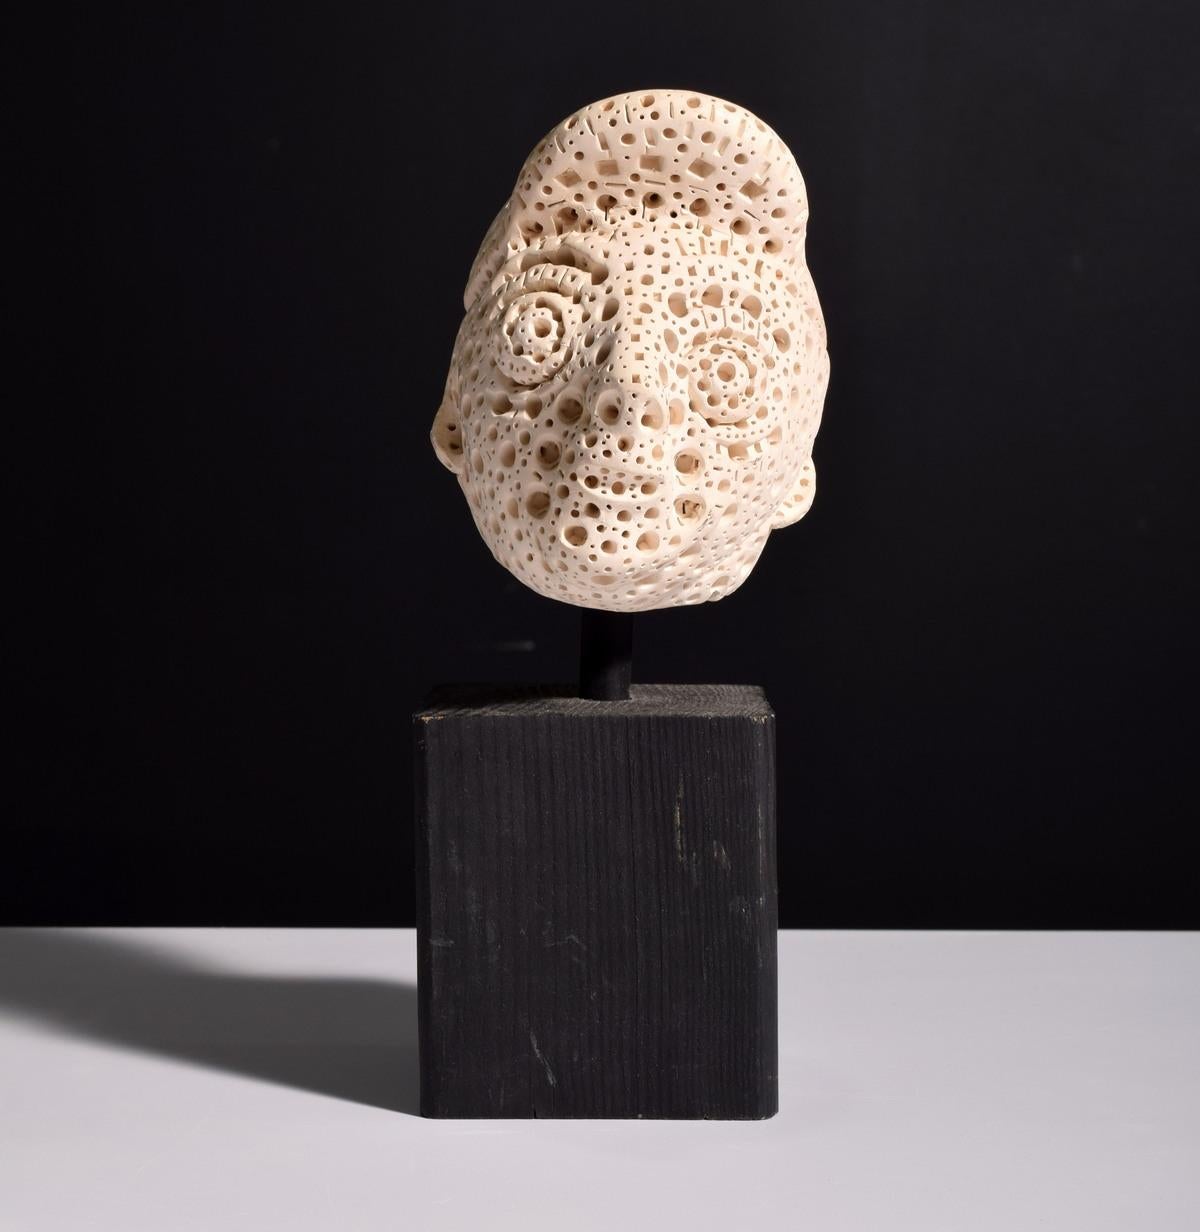 Additional Information: Provenance: Private Collection New York, from a collector of many petite works by the artist.

Marking(s); notes: signed

Country of origin; materials: unknown; white terracotta, wood (base)

Dimensions: 9.75″oah; sculpture: